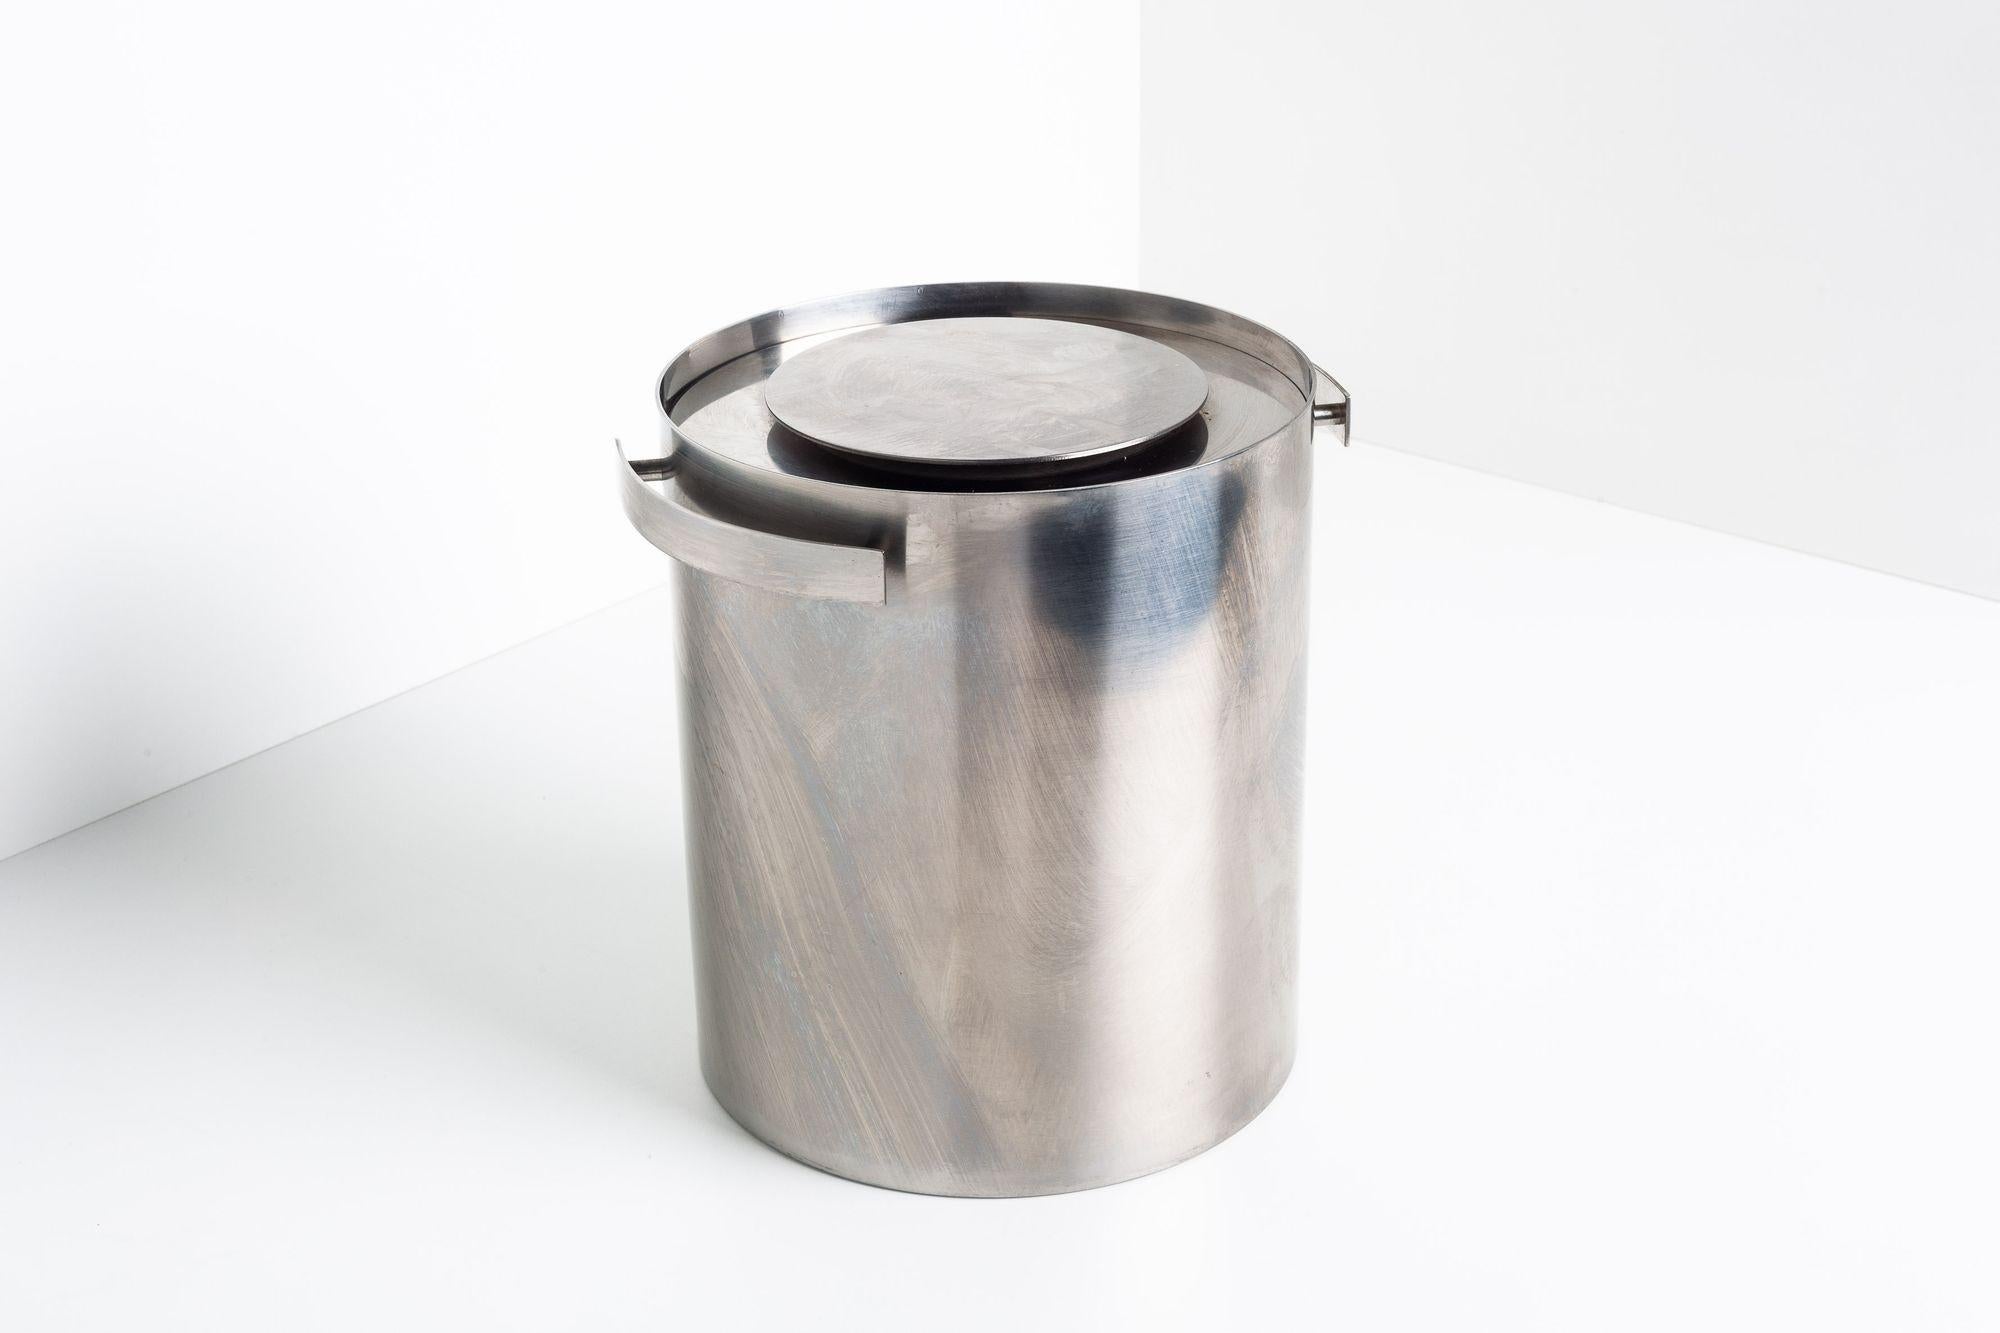 Arne Jacobsen’s original AJ wine cooler/ice bucket was designed in 1969 as part of his Cylinda-Line. The simple cylindrical shape in stainless steel makes for a striking silhouette in any interior. Absolutely ideal for chilling Champagne or wine,